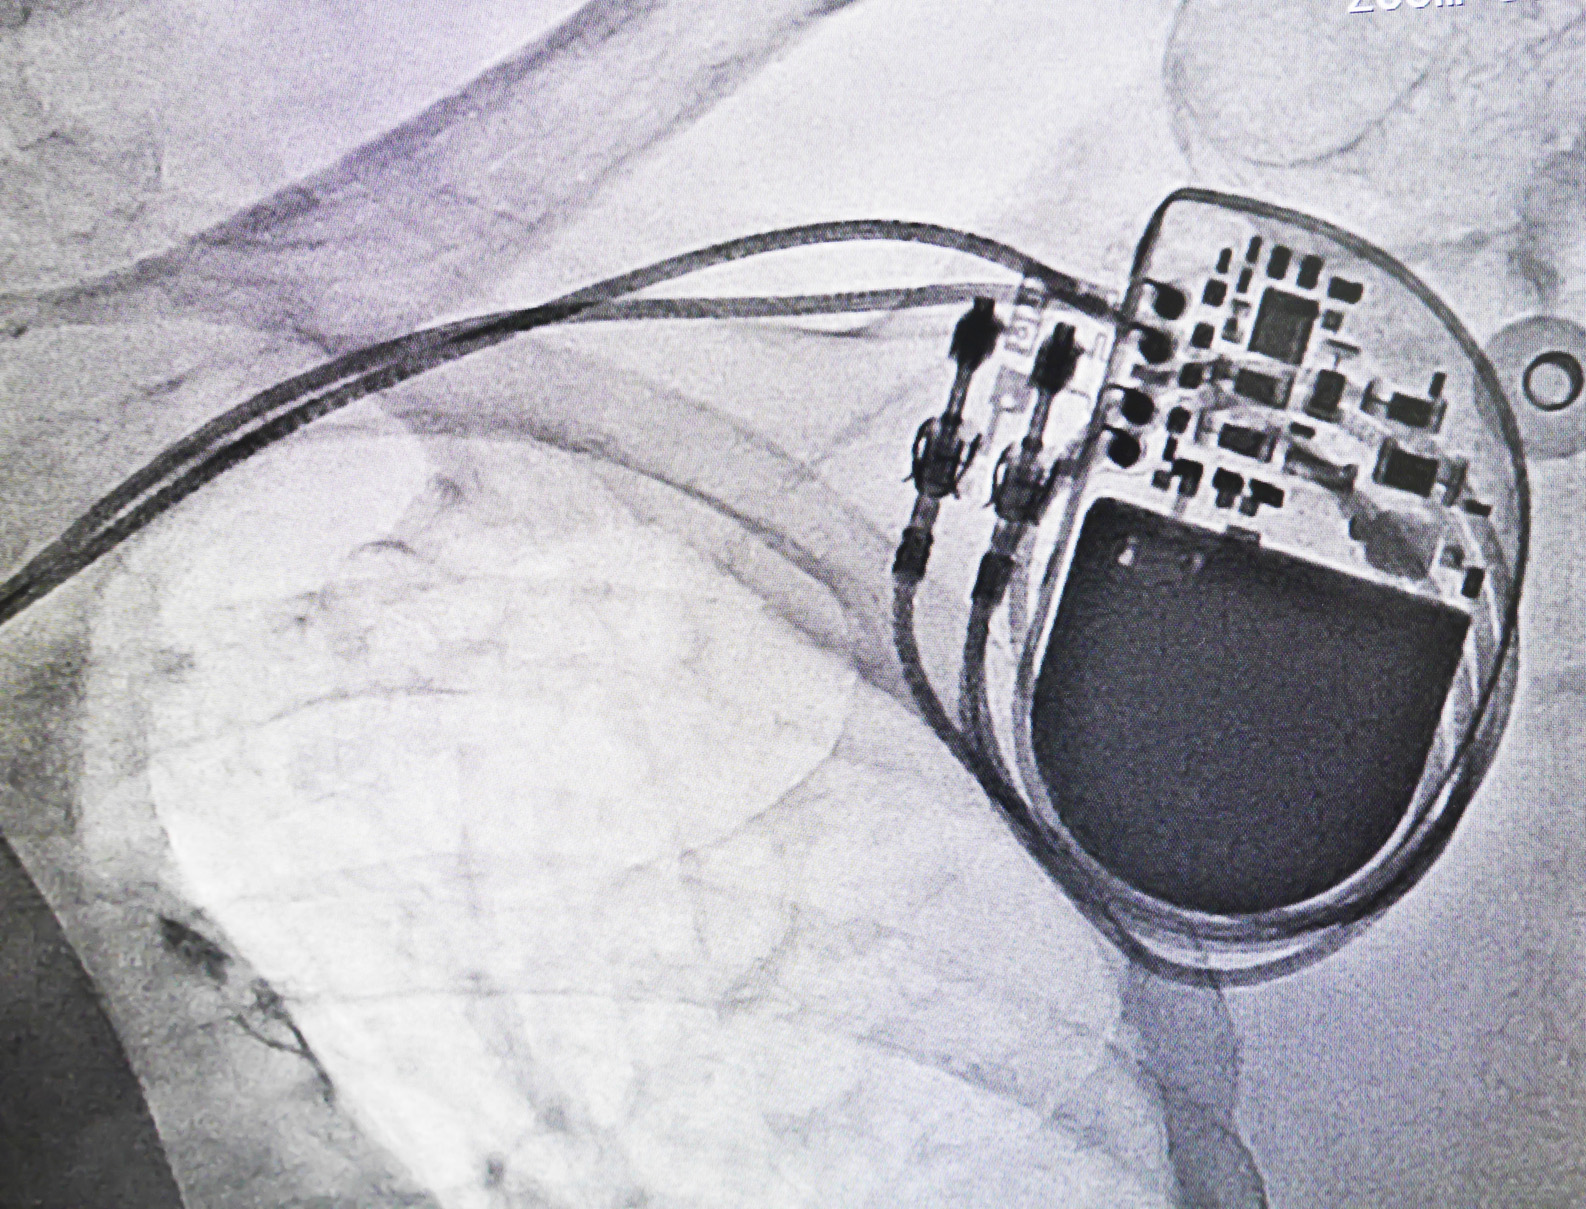 Permanent pacemaker x-ray image in cardiac catheterization